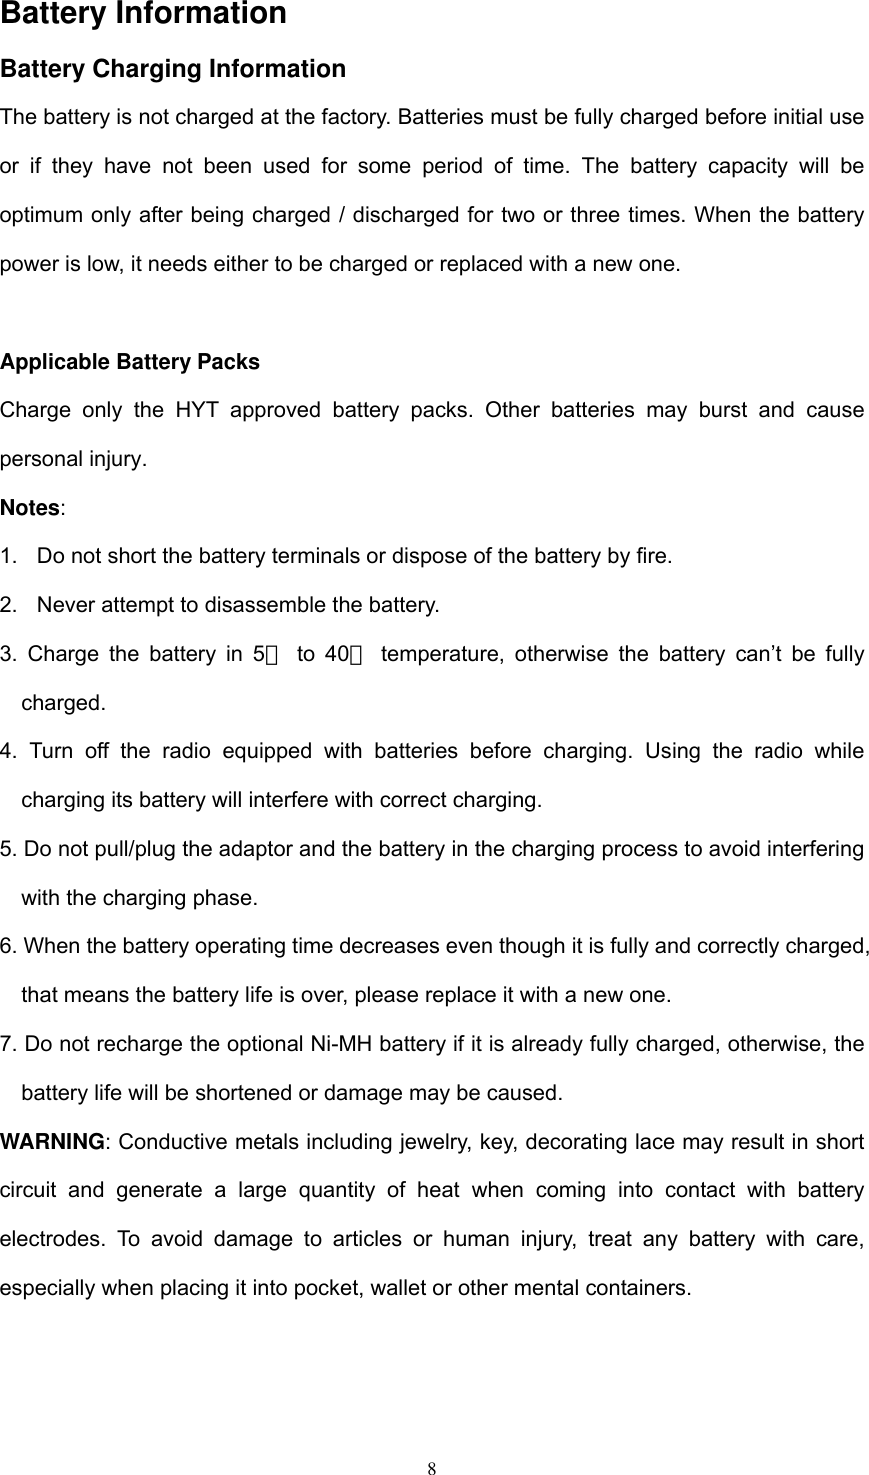  8Battery Information   Battery Charging Information The battery is not charged at the factory. Batteries must be fully charged before initial use or if they have not been used for some period of time. The battery capacity will be optimum only after being charged / discharged for two or three times. When the battery power is low, it needs either to be charged or replaced with a new one.  Applicable Battery Packs Charge only the HYT approved battery packs. Other batteries may burst and cause personal injury. Notes: 1.  Do not short the battery terminals or dispose of the battery by fire. 2.  Never attempt to disassemble the battery. 3. Charge the battery in 5℃ to 40  temperature, otherwise the battery can’t be fully ℃charged. 4. Turn off the radio equipped with batteries before charging. Using the radio while charging its battery will interfere with correct charging. 5. Do not pull/plug the adaptor and the battery in the charging process to avoid interfering with the charging phase. 6. When the battery operating time decreases even though it is fully and correctly charged, that means the battery life is over, please replace it with a new one. 7. Do not recharge the optional Ni-MH battery if it is already fully charged, otherwise, the battery life will be shortened or damage may be caused. WARNING: Conductive metals including jewelry, key, decorating lace may result in short circuit and generate a large quantity of heat when coming into contact with battery electrodes. To avoid damage to articles or human injury, treat any battery with care, especially when placing it into pocket, wallet or other mental containers.  